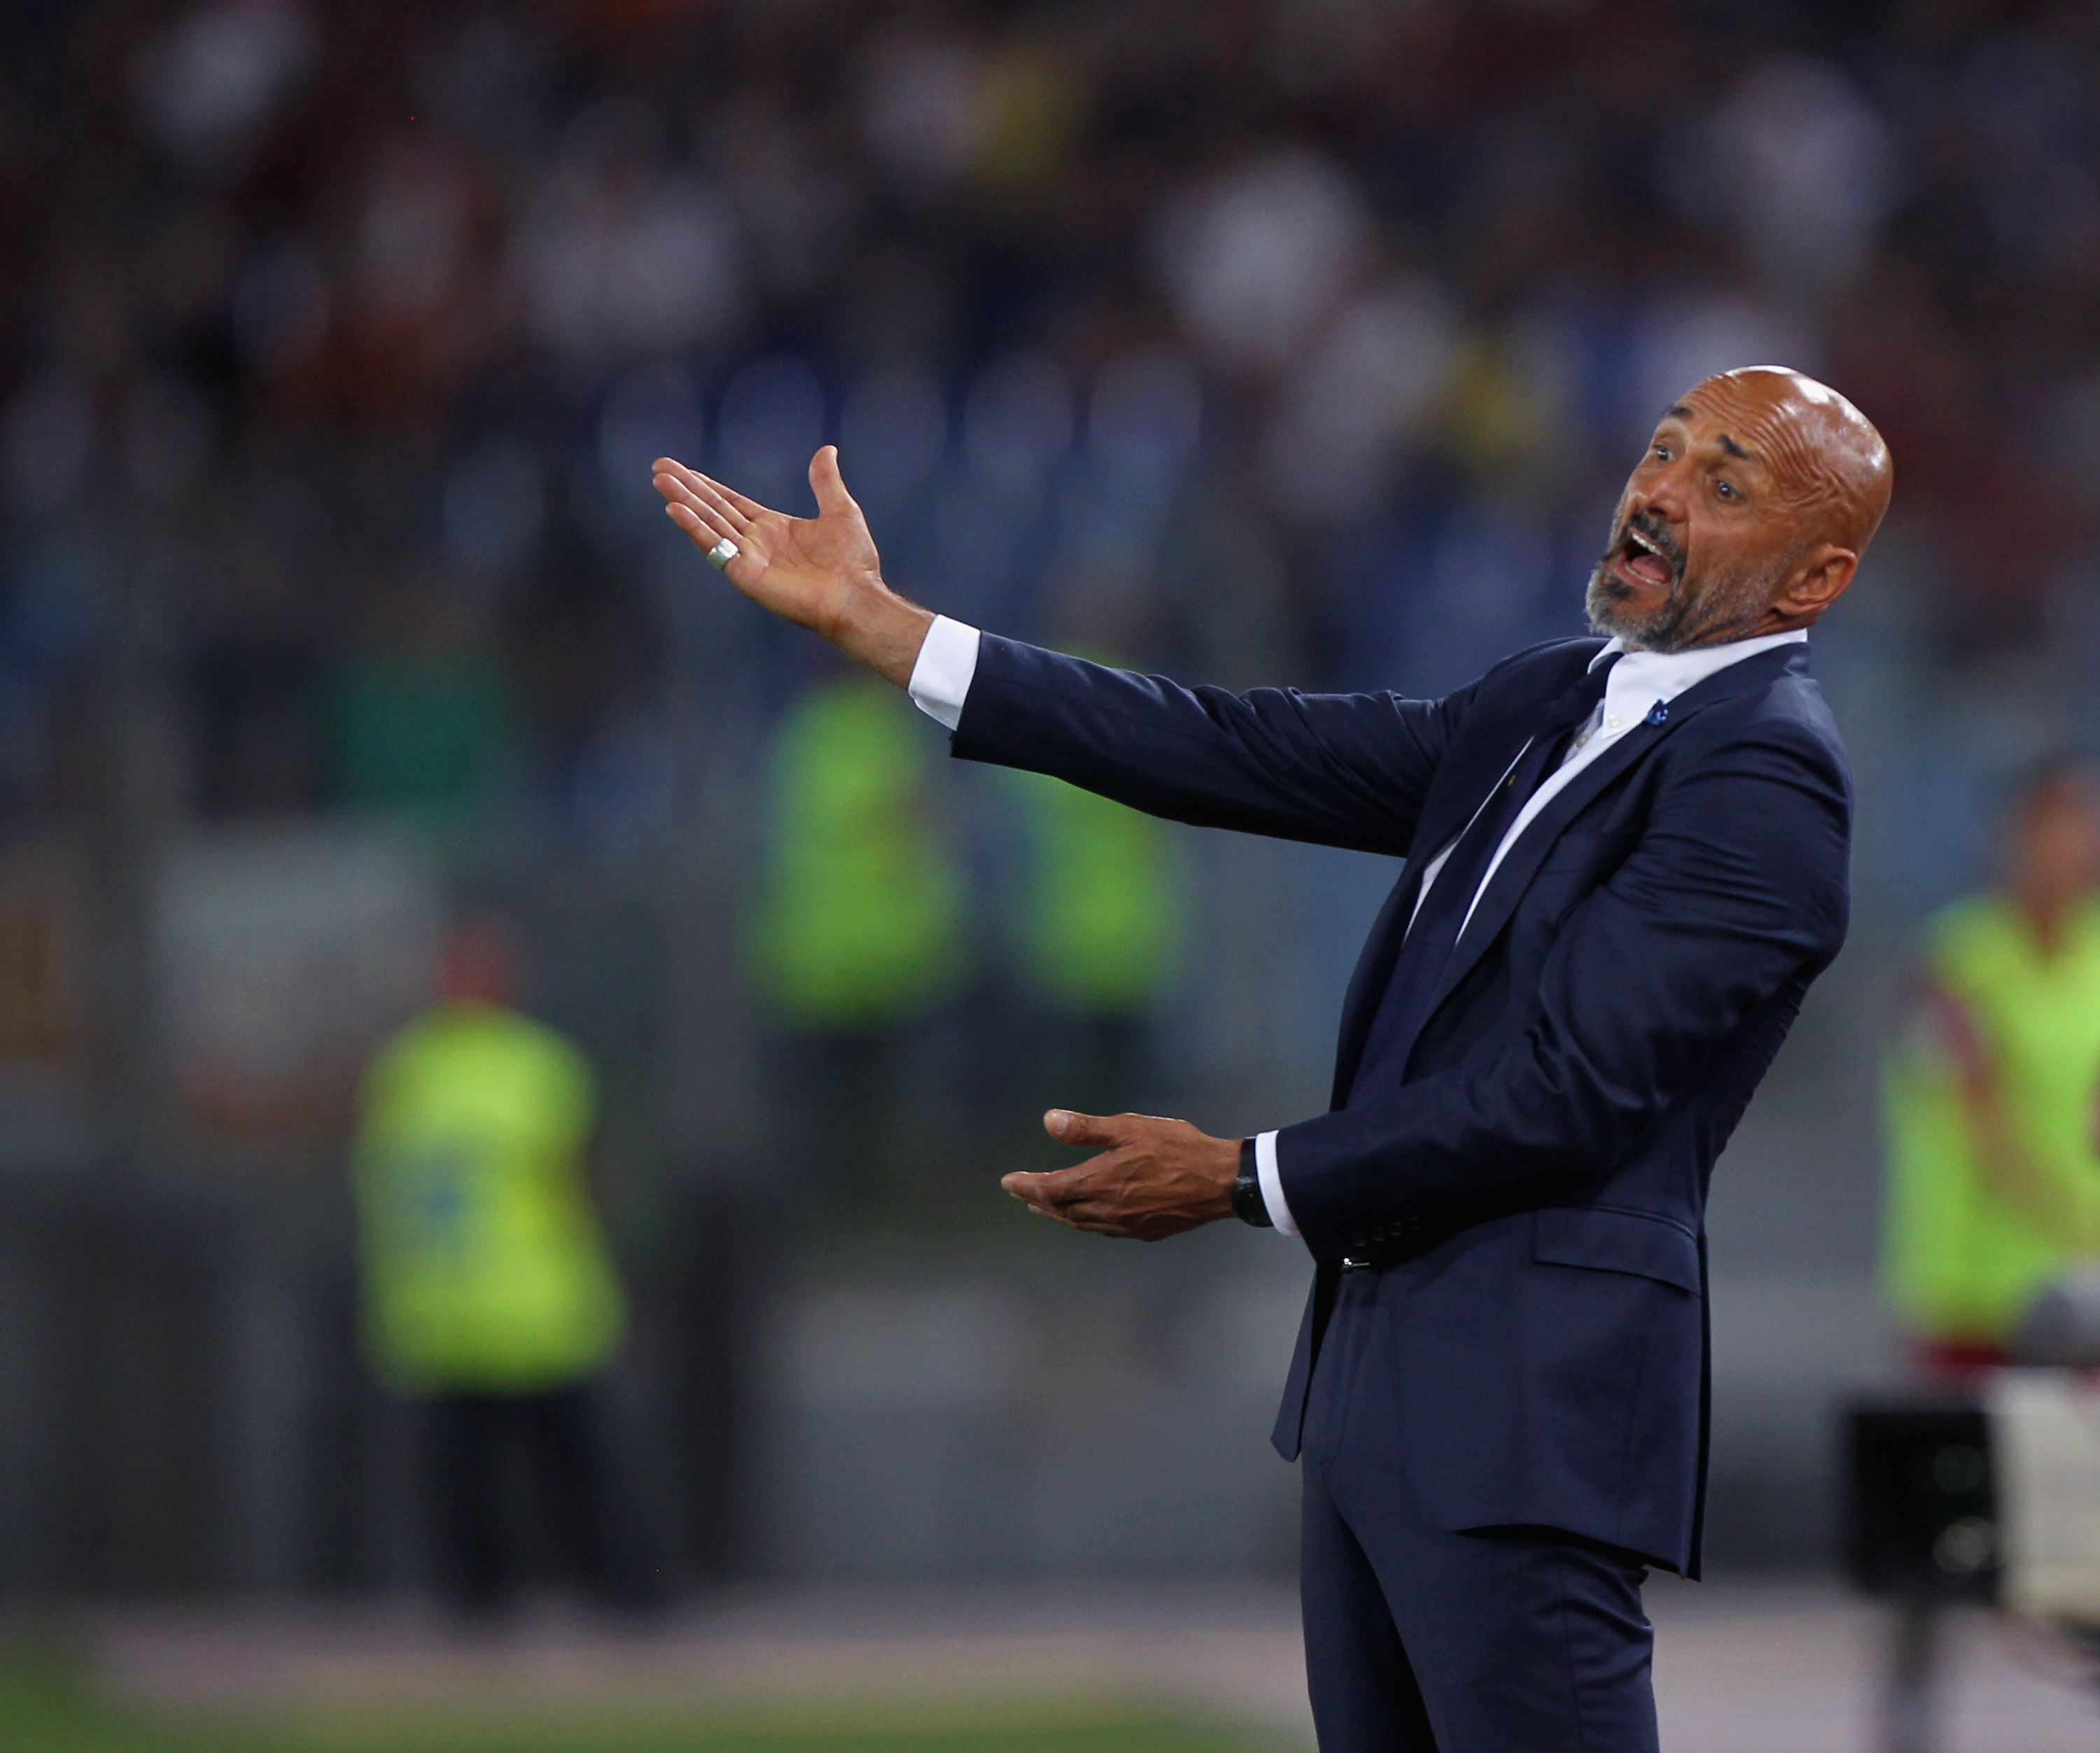 ROME, ITALY - AUGUST 26:  FC Internazionale head coach Luciano Spalletti reacts during the Serie A match between AS Roma and FC Internazionale on August 26, 2017 in Rome, Italy.  (Photo by Paolo Bruno/Getty Images)